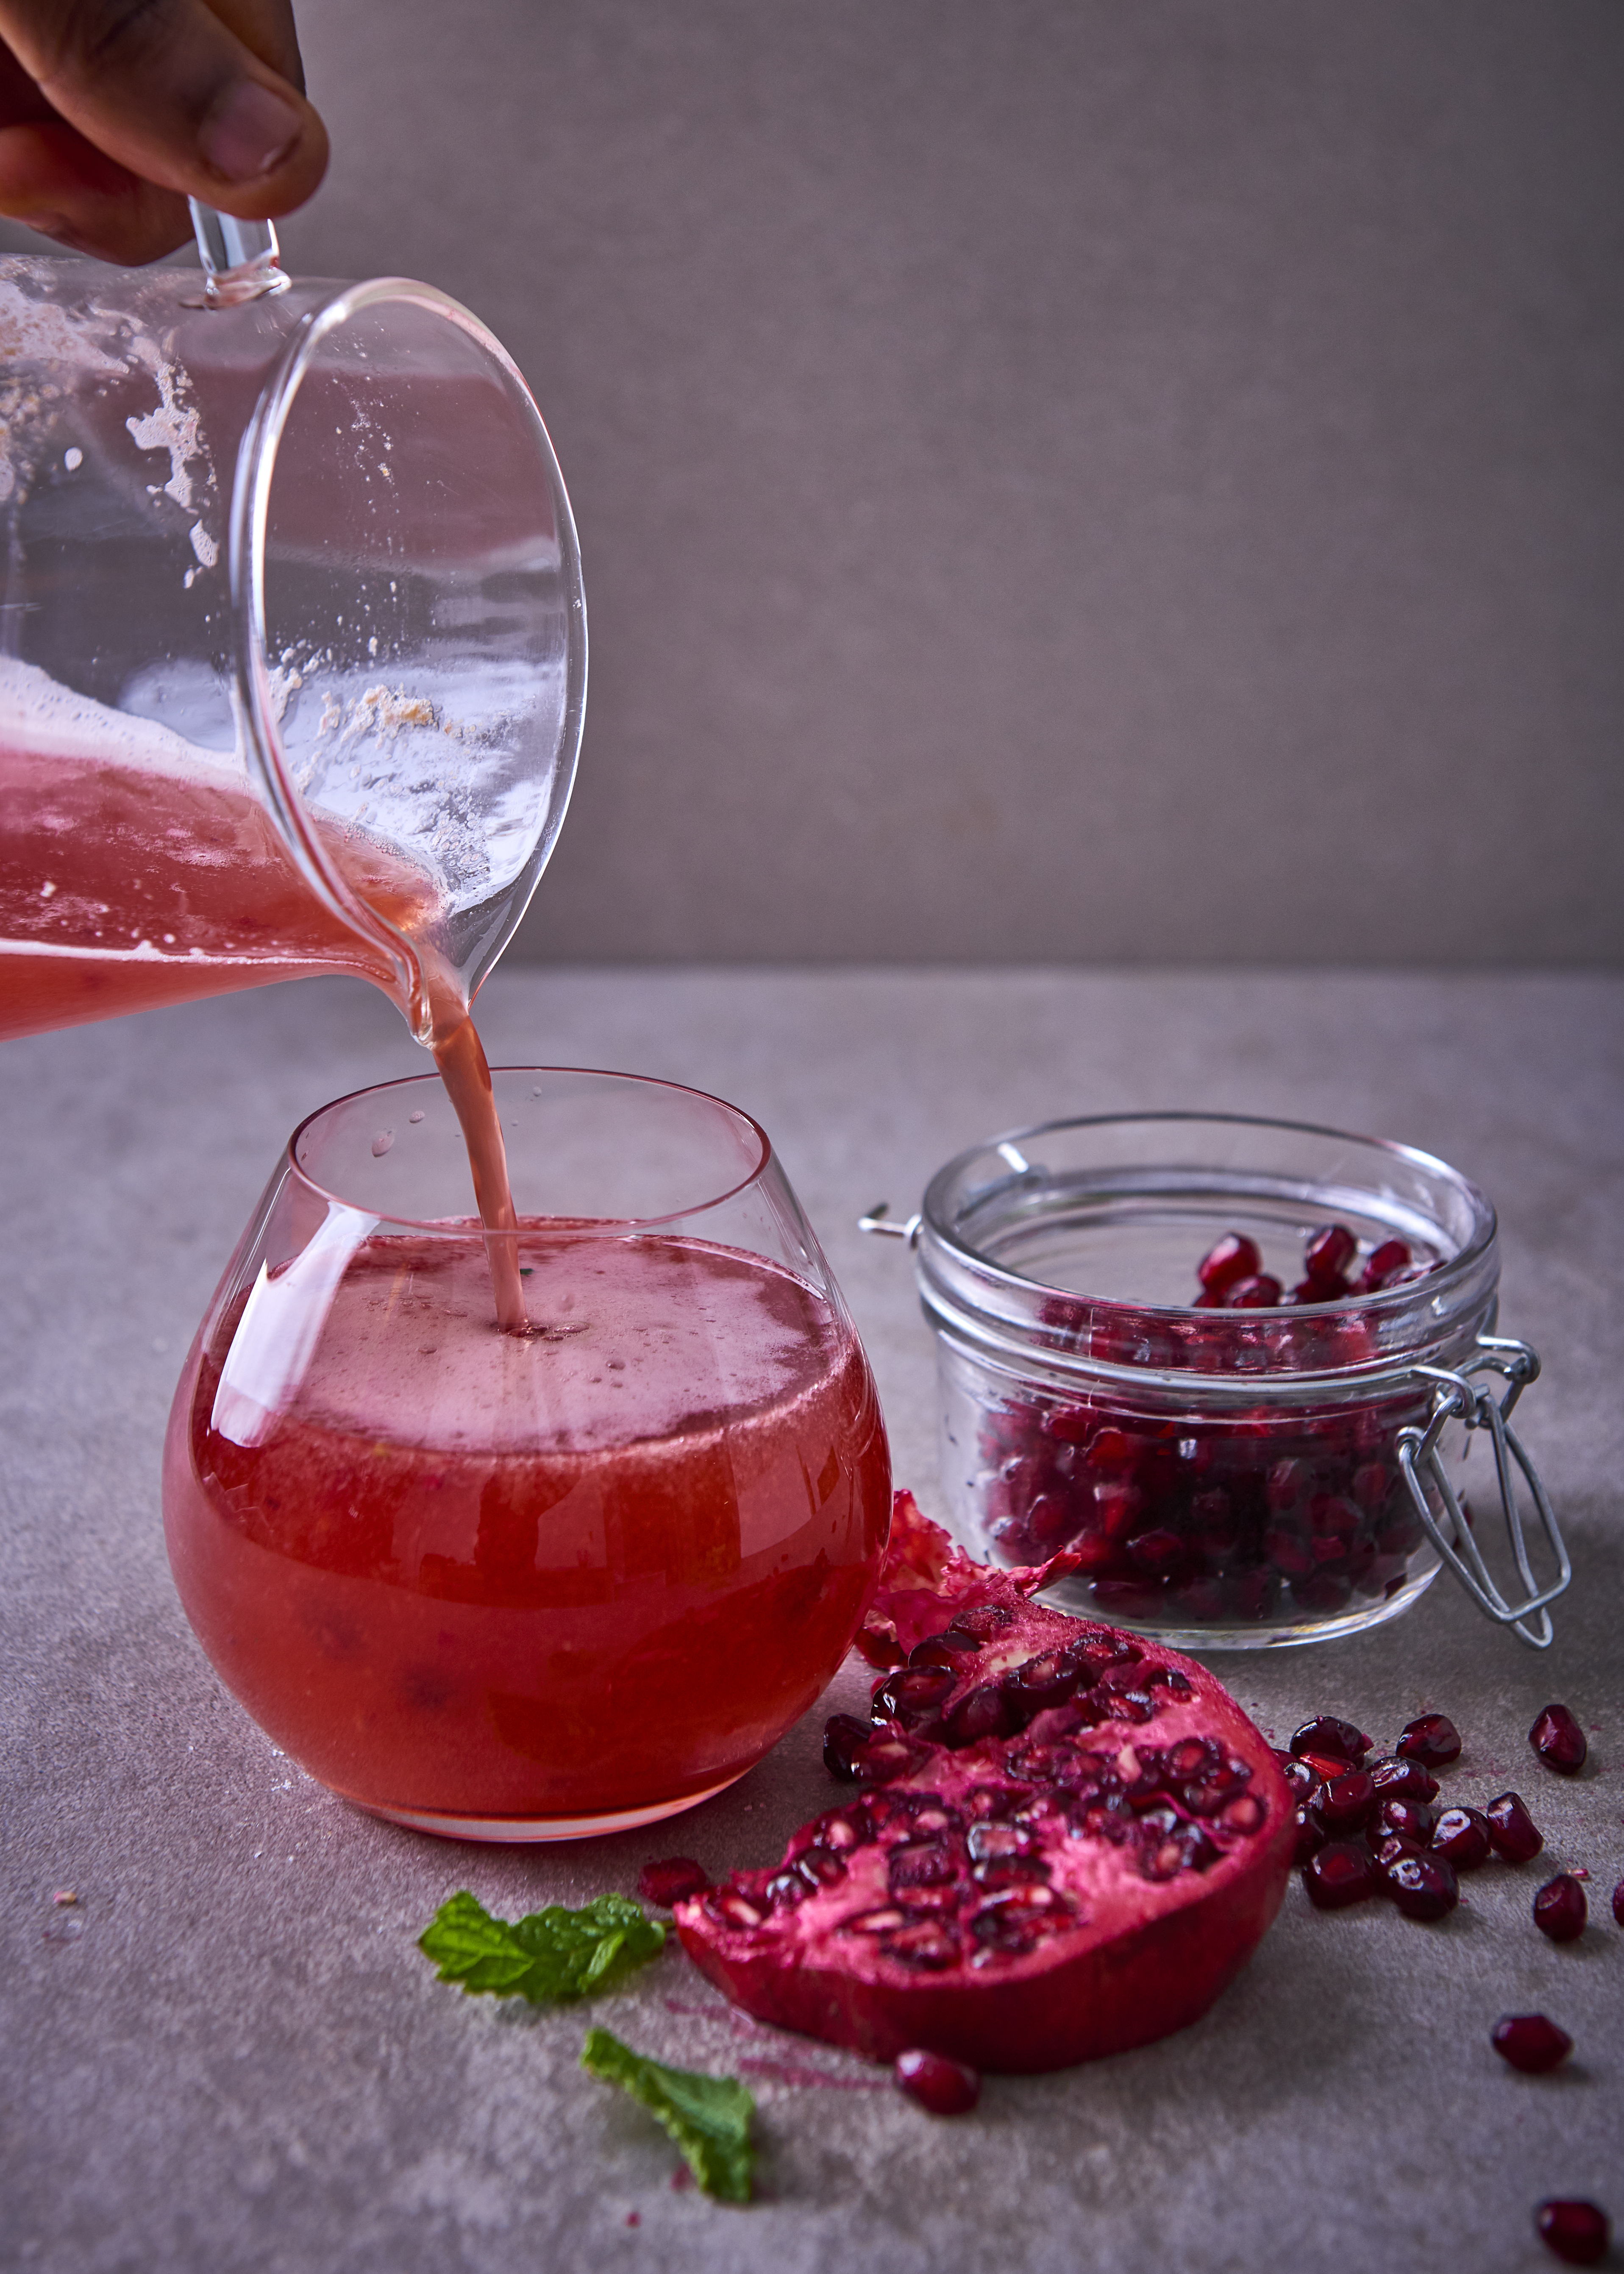 jQuick and easy to make in 3 minutes pomegranate fruit punch